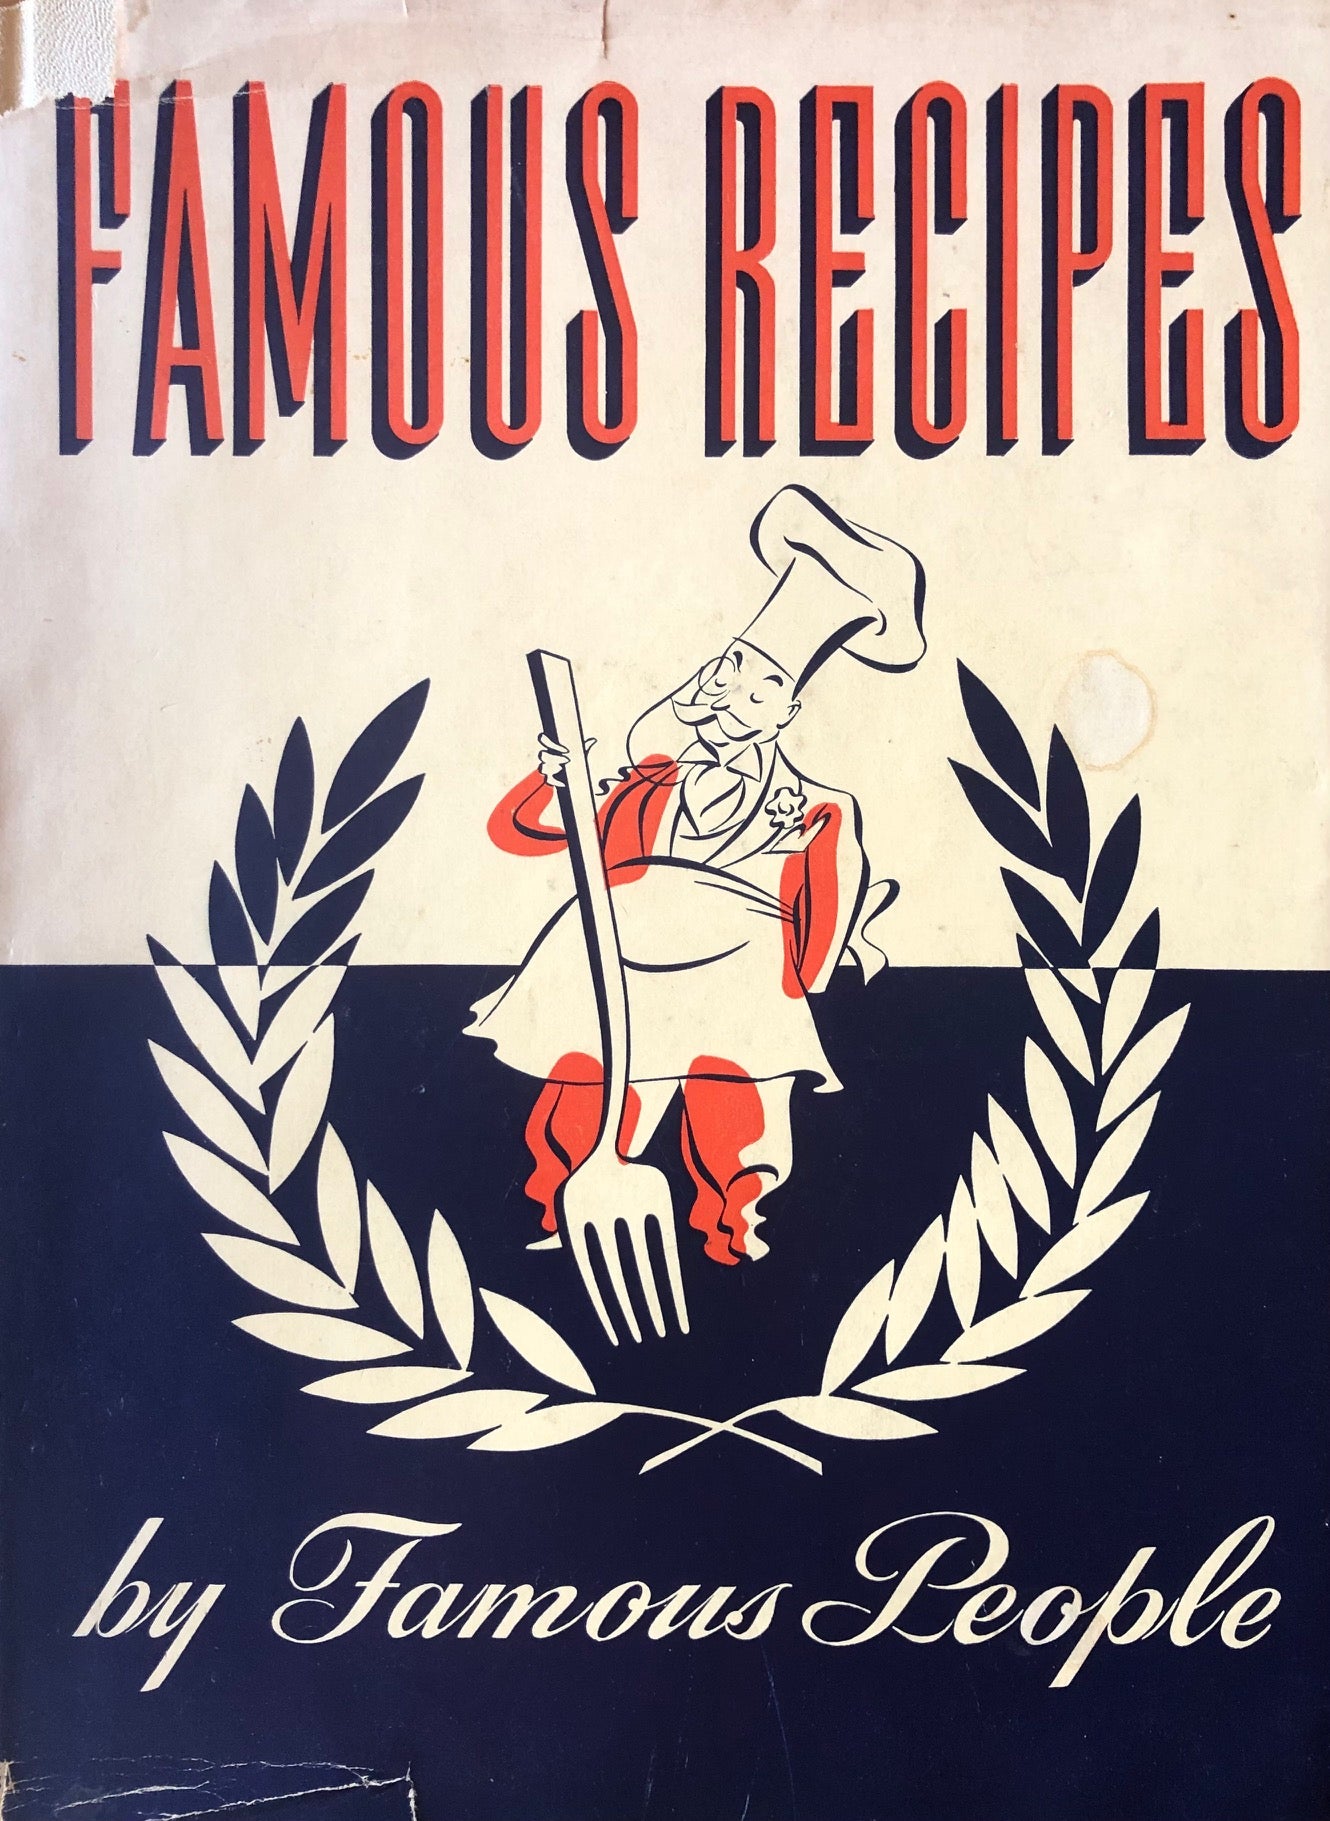 (California) Cerwin, Herbert, ed.  Famous Recipes by Famous People.